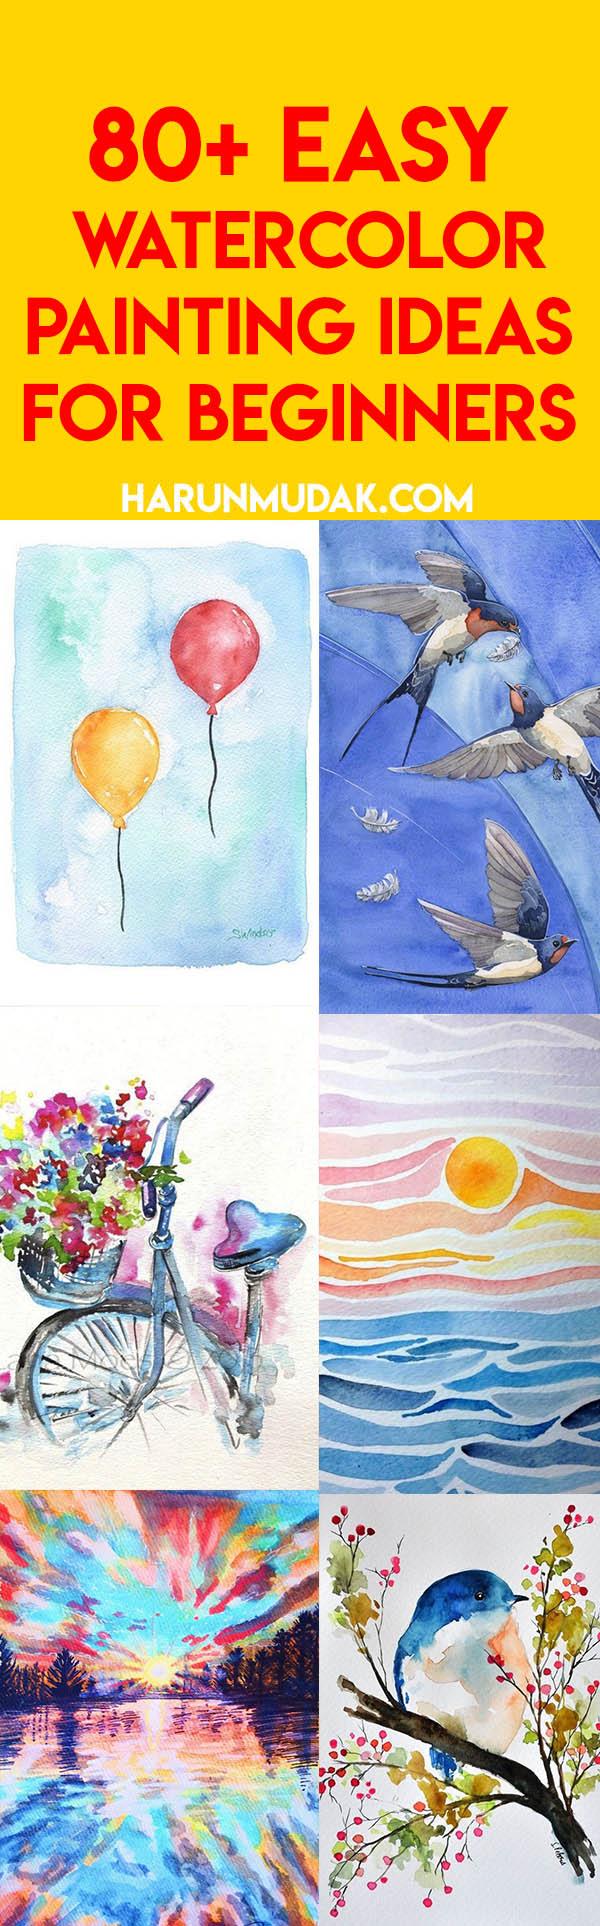 Easy Watercolor Painting Ideas for Beginners Step by Step 